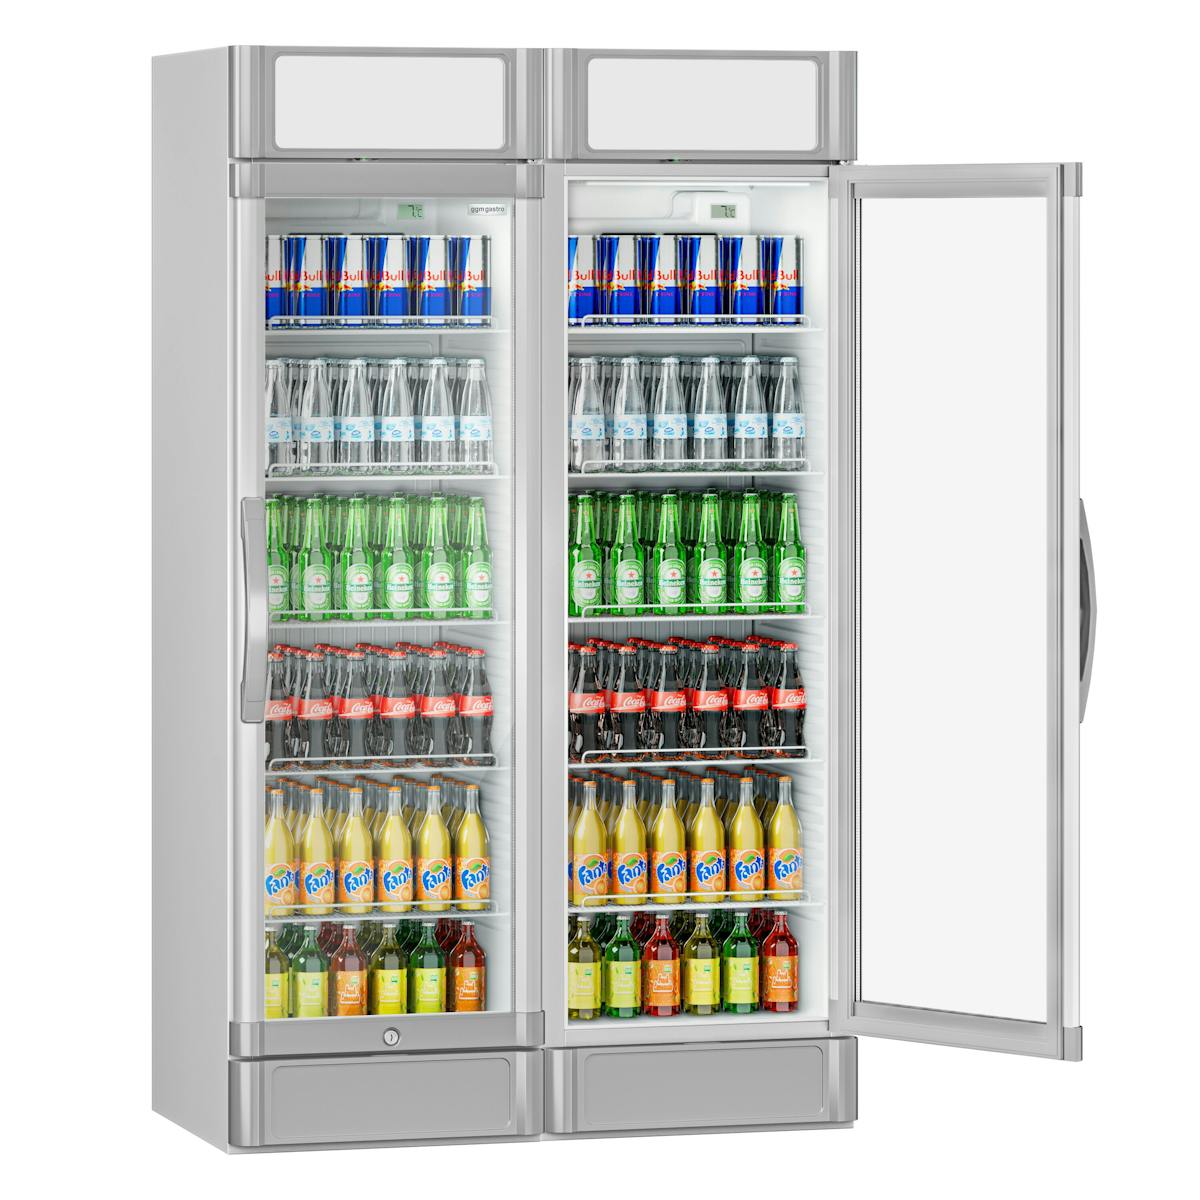 (2 pieces) Beverage refrigerator - 690 litres (total) - white/grey